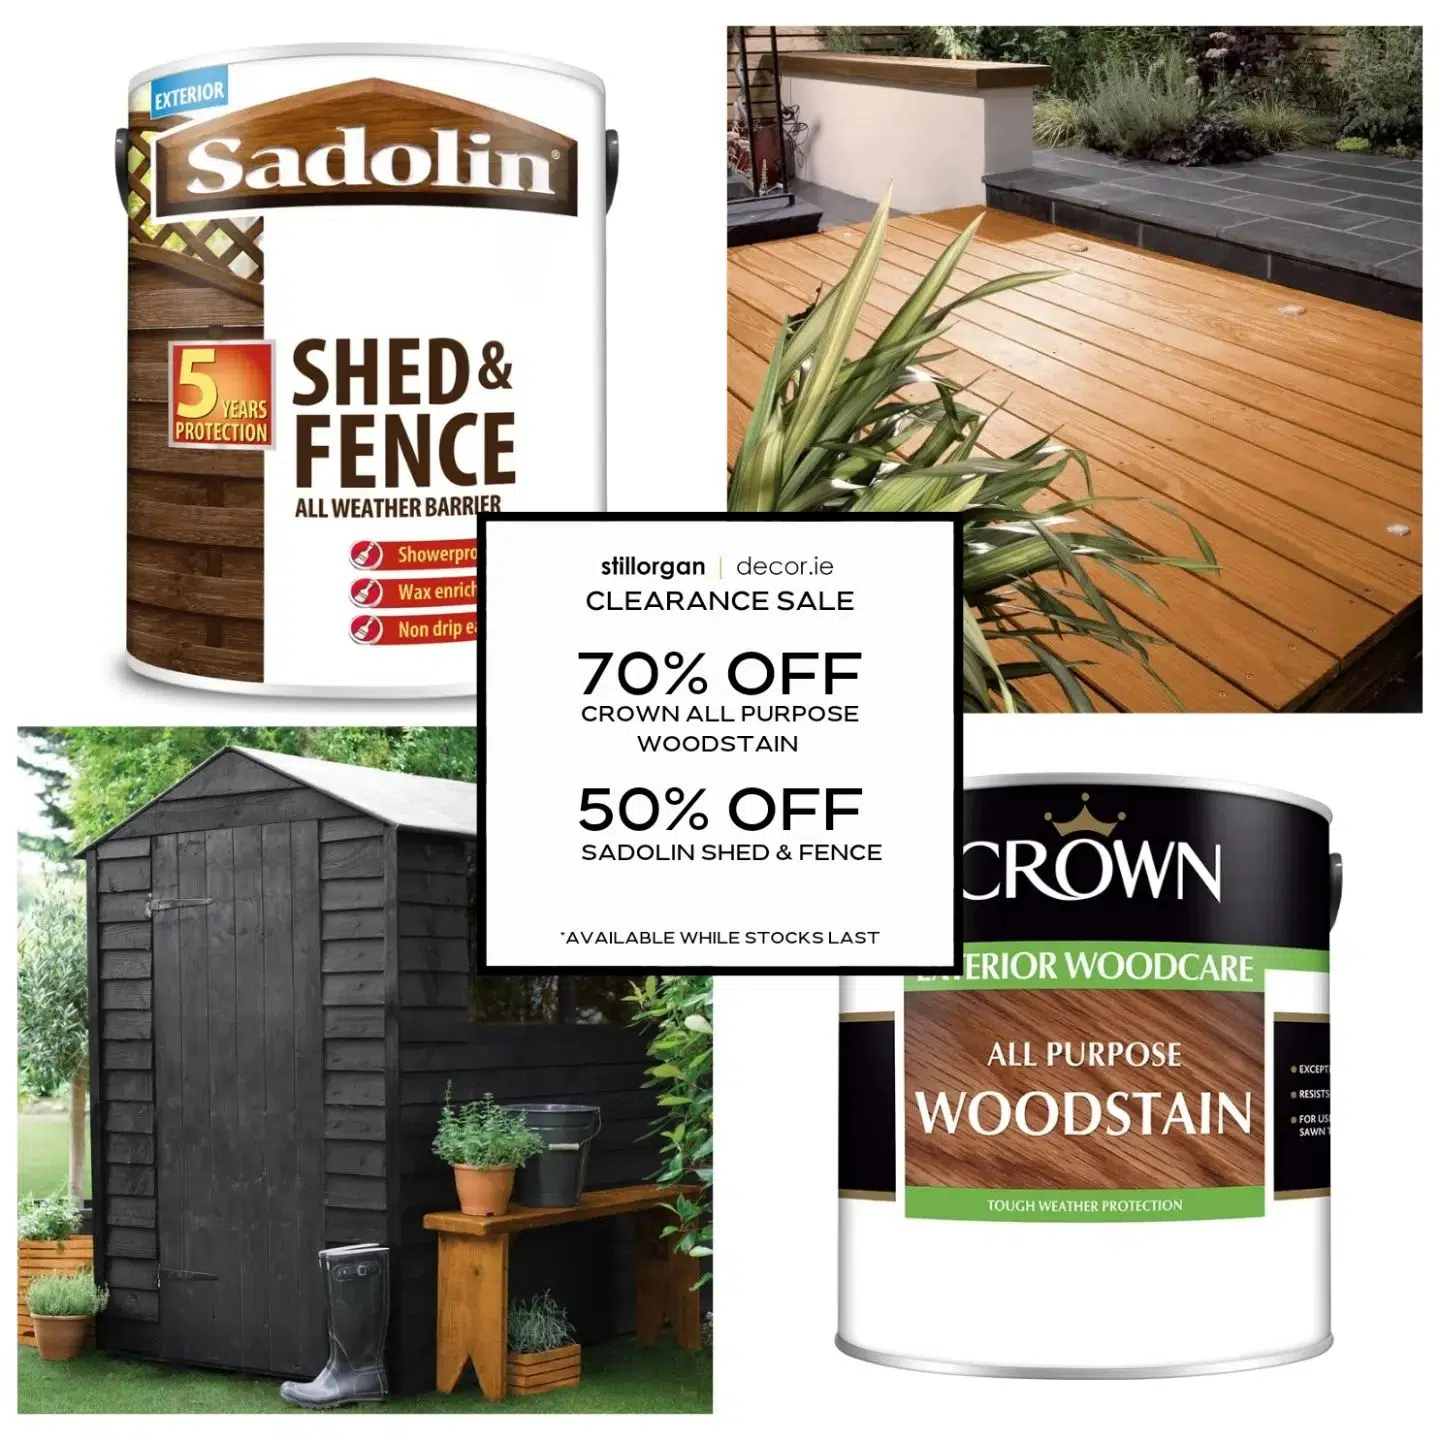 Get your garden summer ready with these amazing savings on Clearance Stock of Sadolin Shed & Fence and Crown All Purpose Woodstain at stillorgandecor.ie available for delivery nationwide.